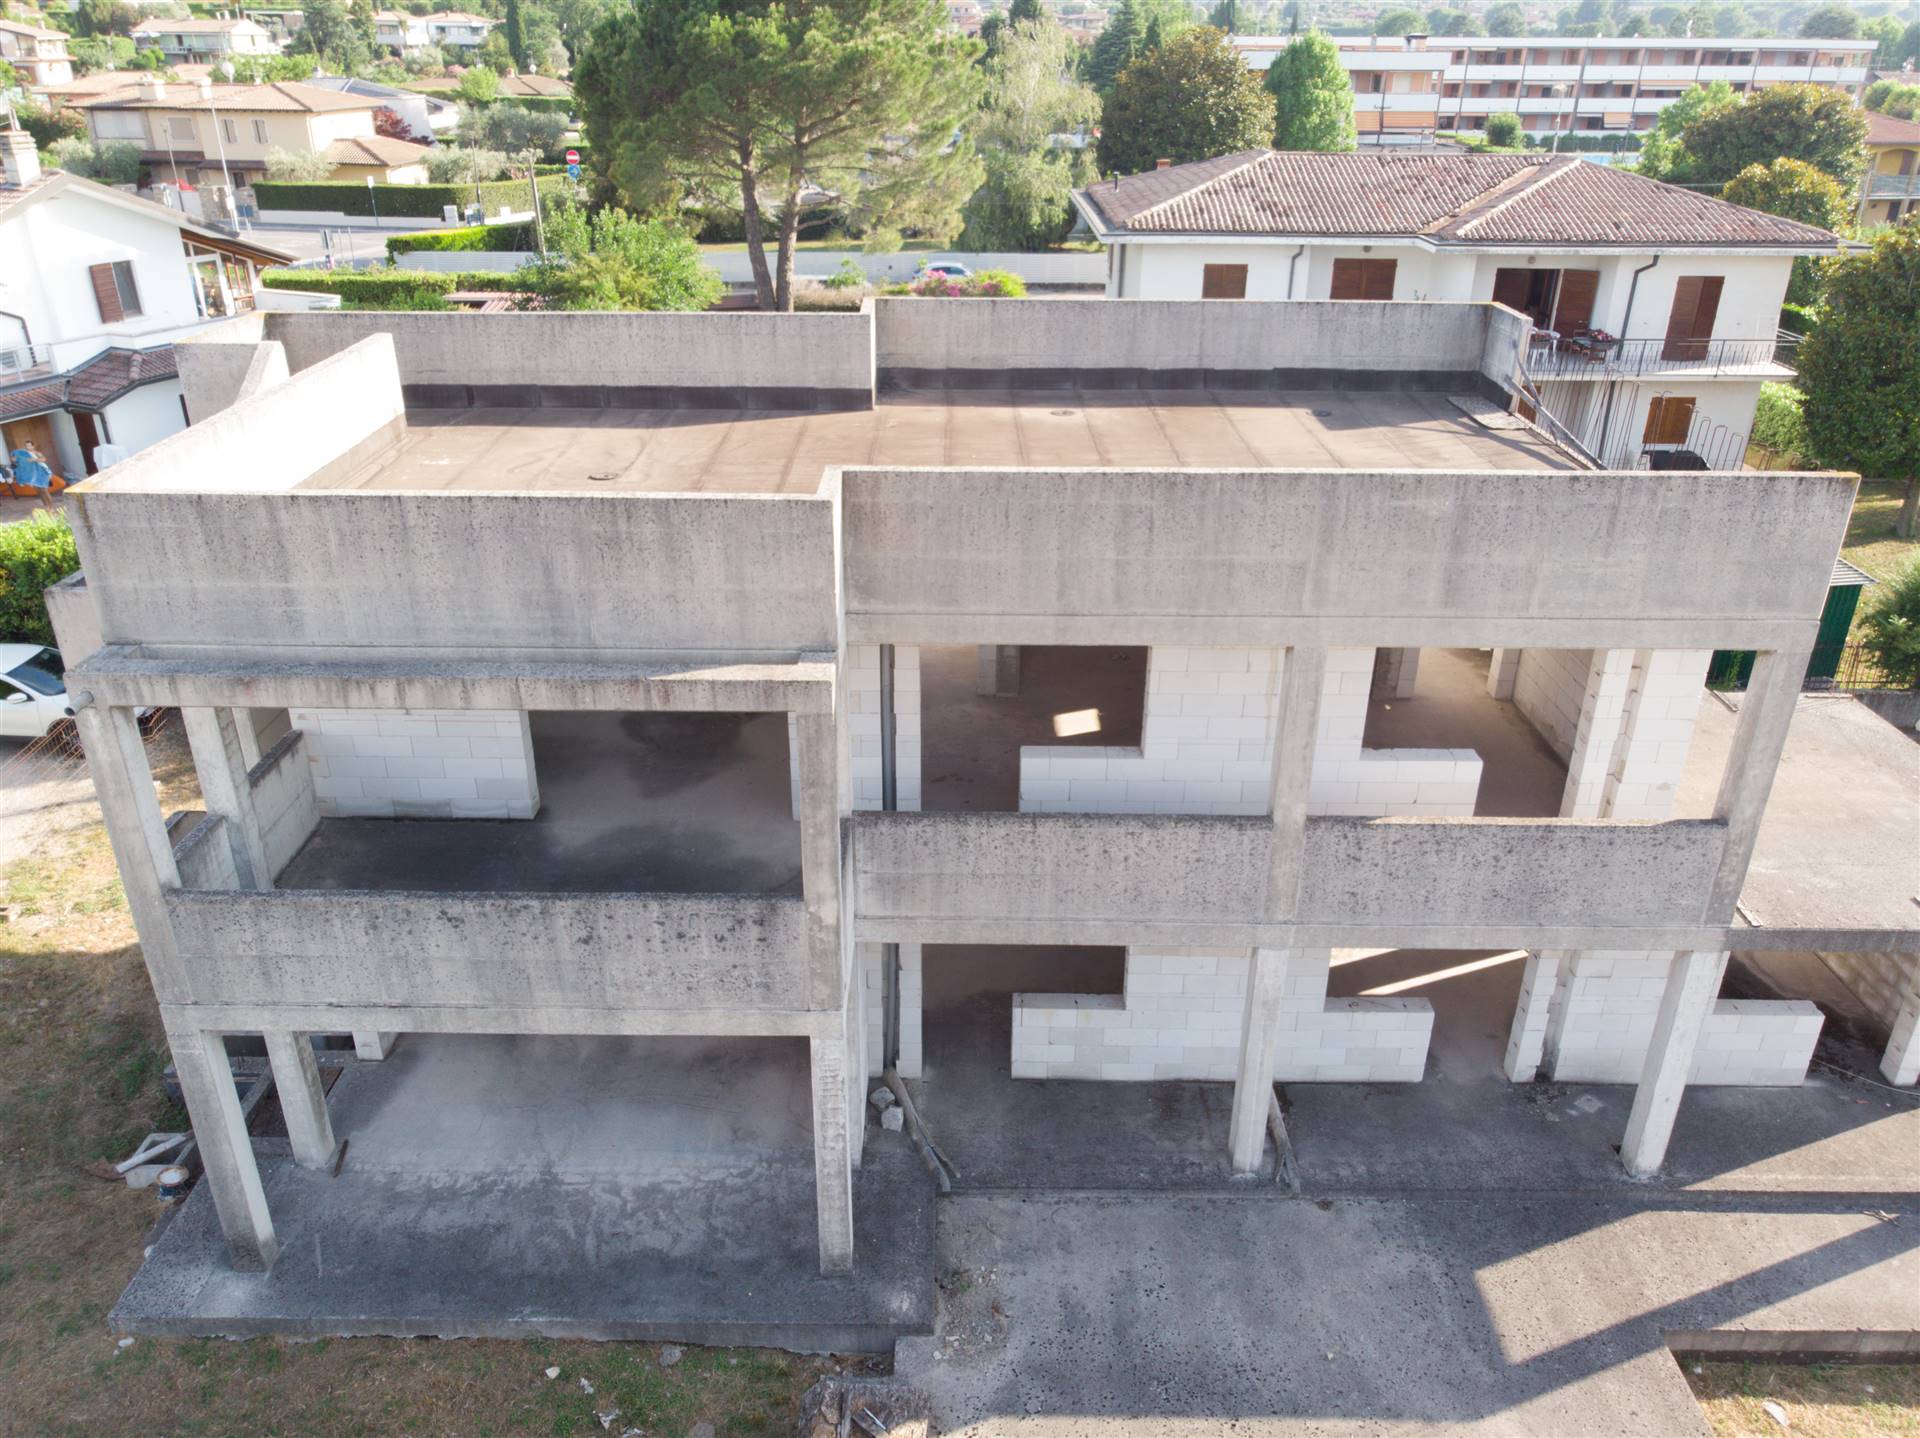 MANERBA DEL GARDA, Villa for sale of 190 Sq. mt., Be restored, Heating Non-existent, Energetic class: G, composed by: 4 Rooms, Separate kitchen, Double Box, Garden, Terrace, Price: € 450,000